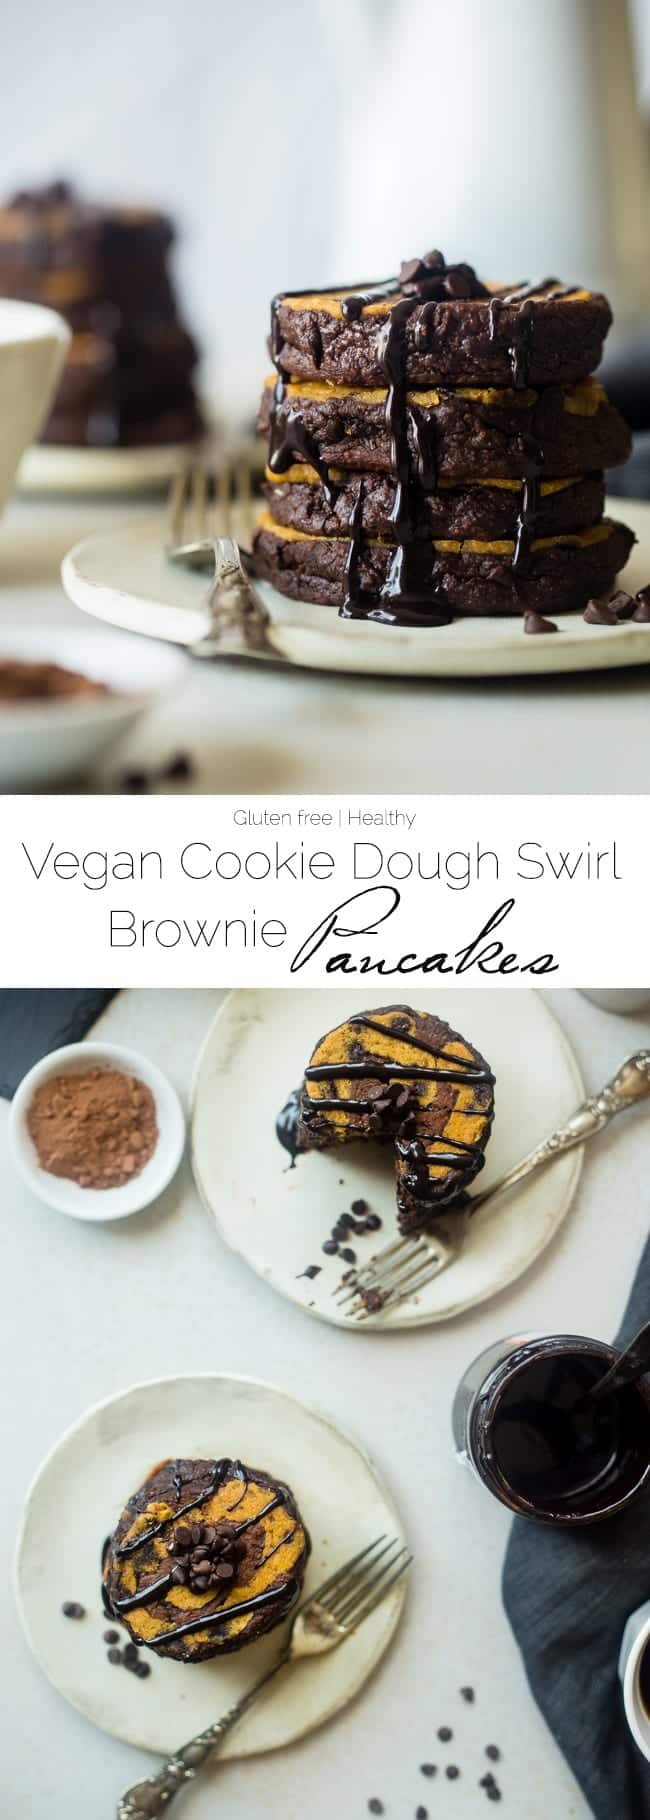 Cookie Dough Swirled Vegan Brownie Pancakes - These easy vegan pancakes taste like a rich brownie and have a cookie dough swirl! They are a healthy, gluten free breakfast that tastes like dessert! | Foodfaithfitness.com | @FoodFaithFit